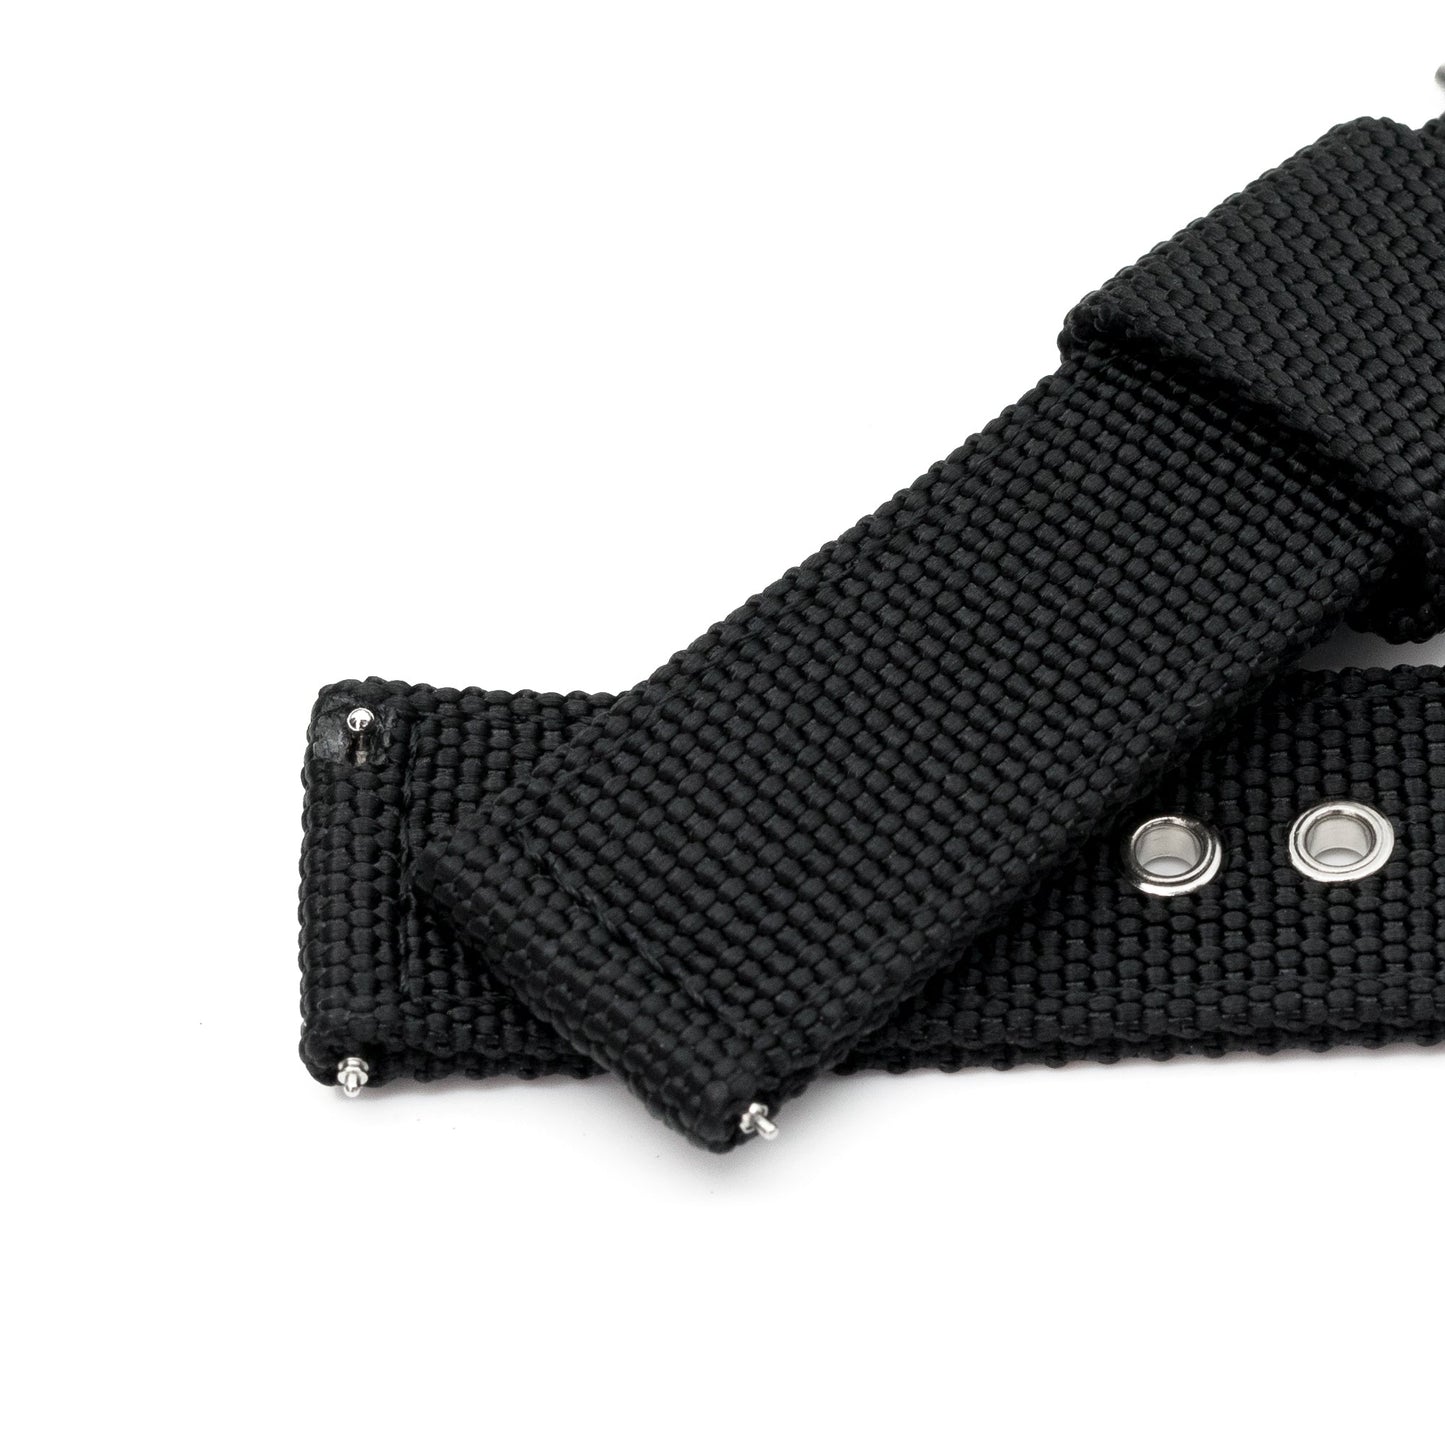 Black Premium Nylon Weaved Quick Release Watch Band with Eyelet